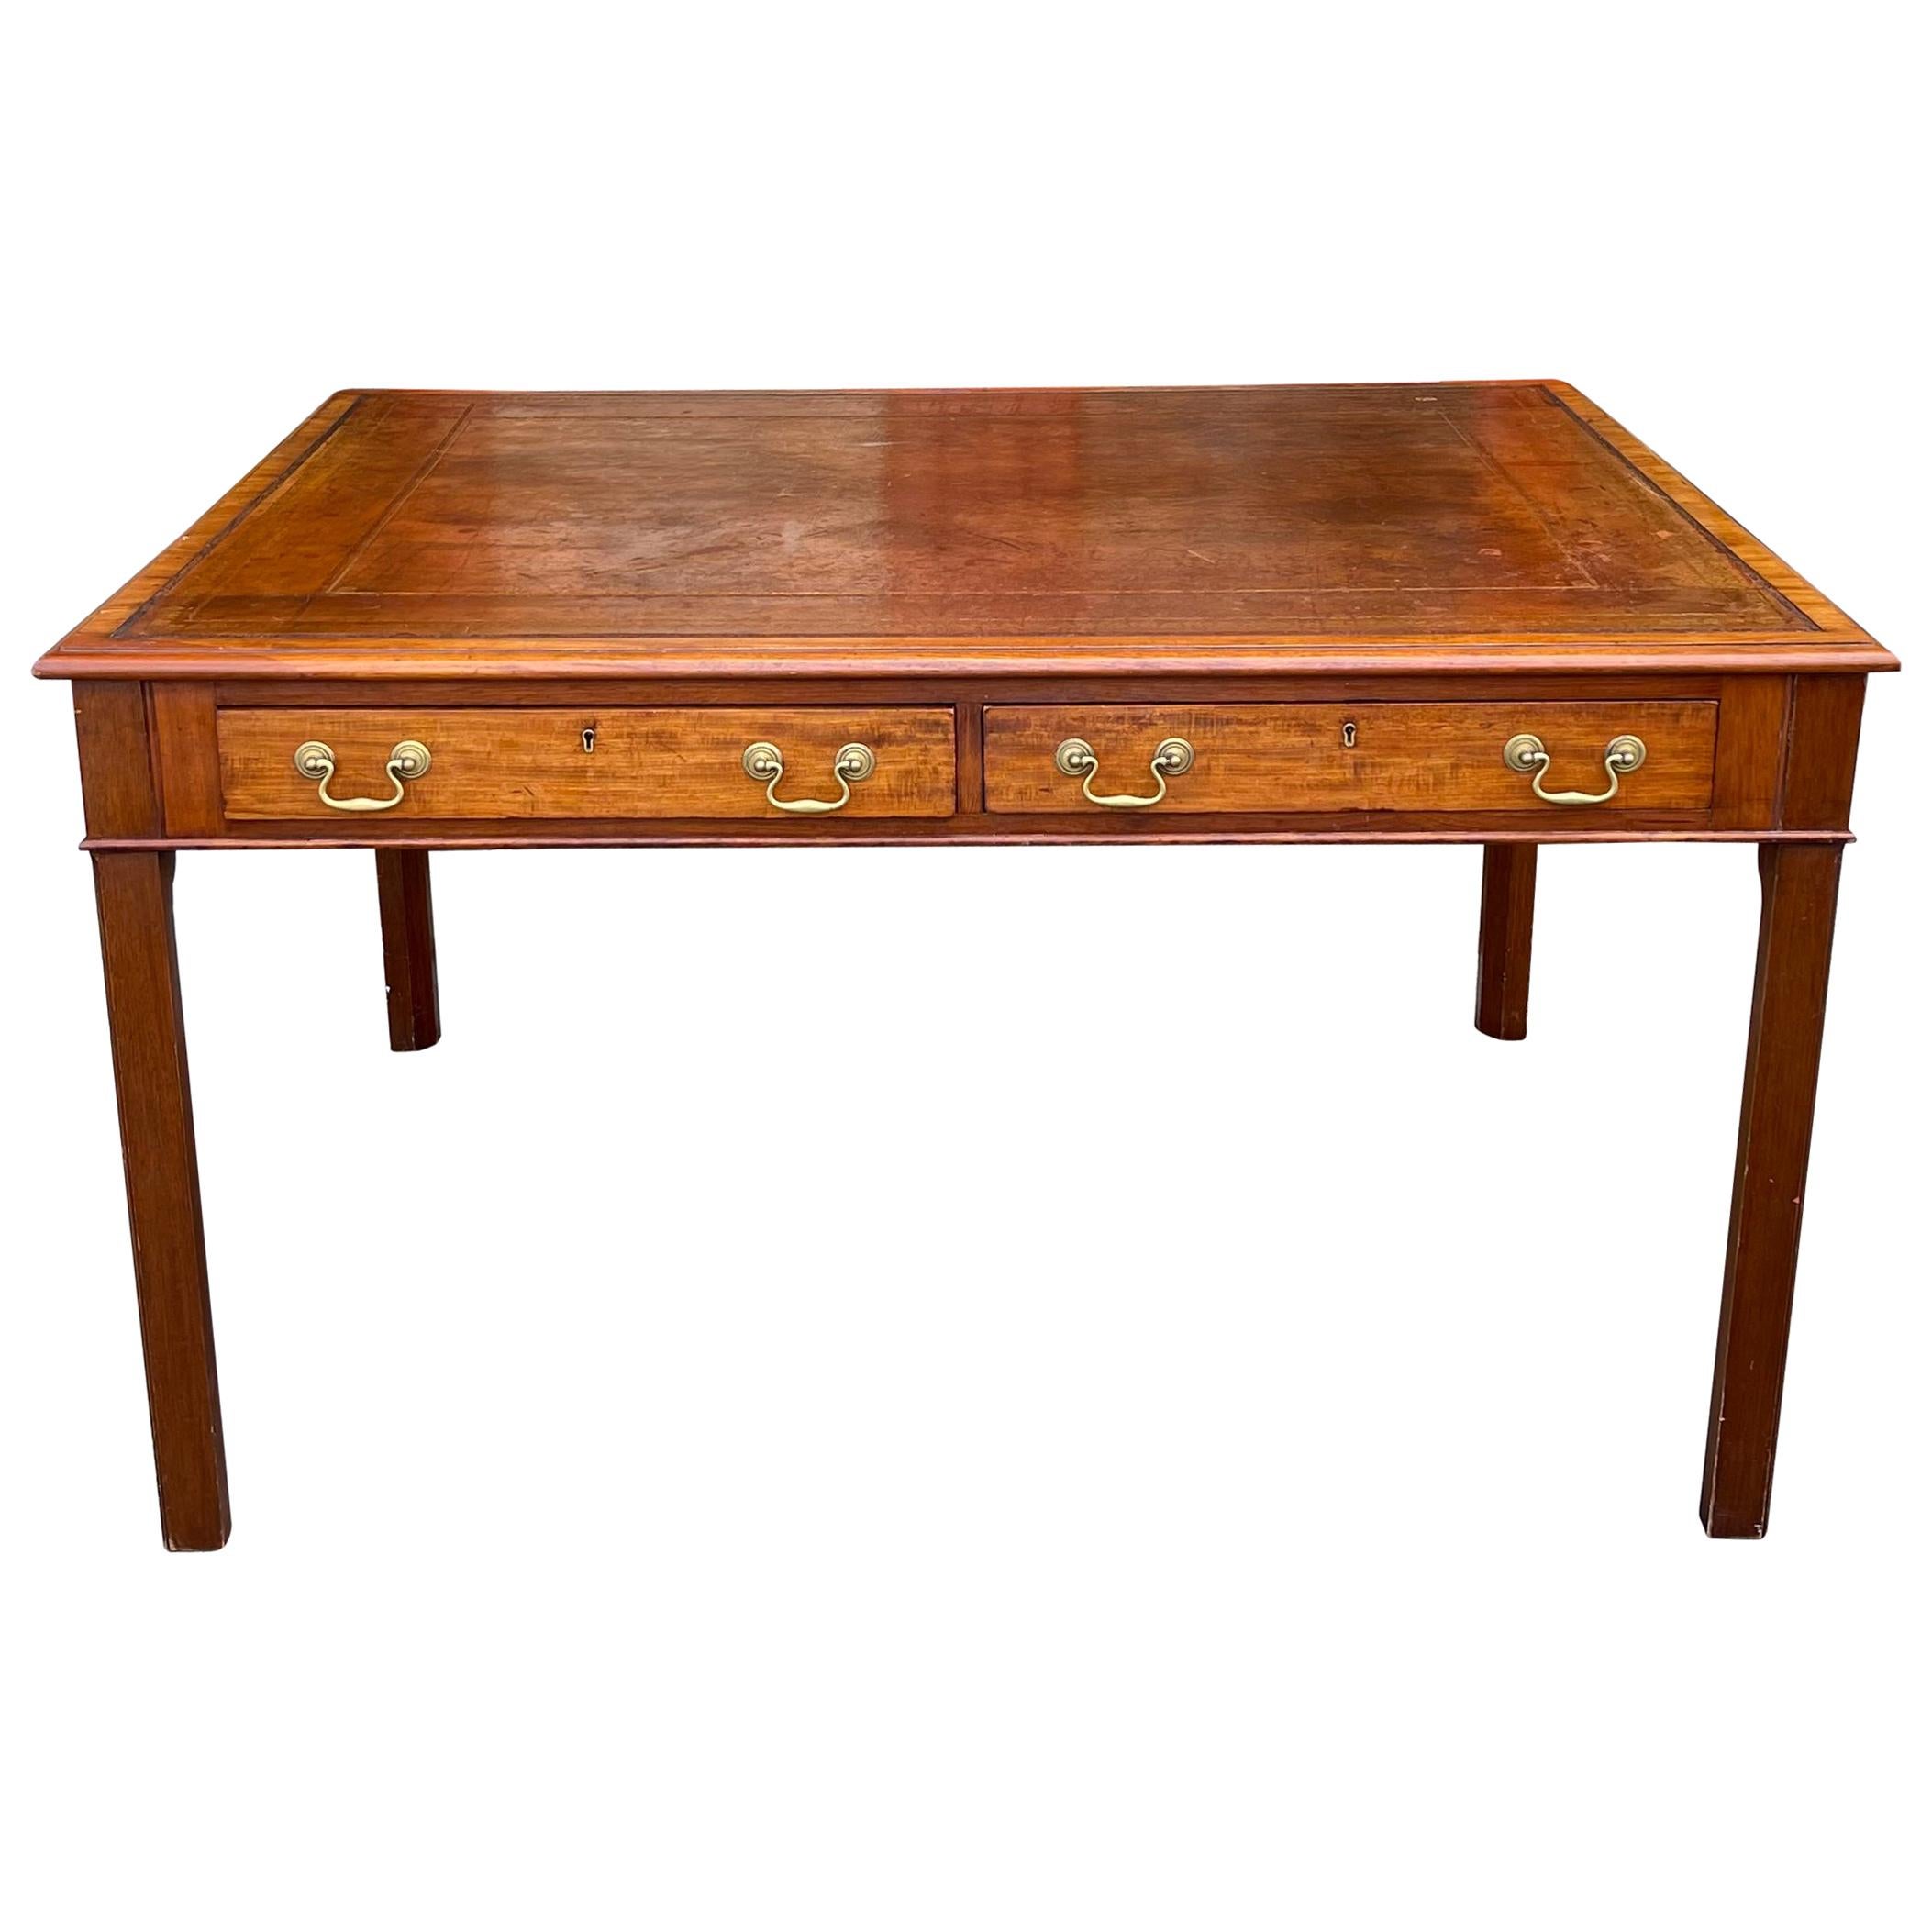 English Mahogany Writing Desk with 4 Drawers over Leather Tooled Writing Surface